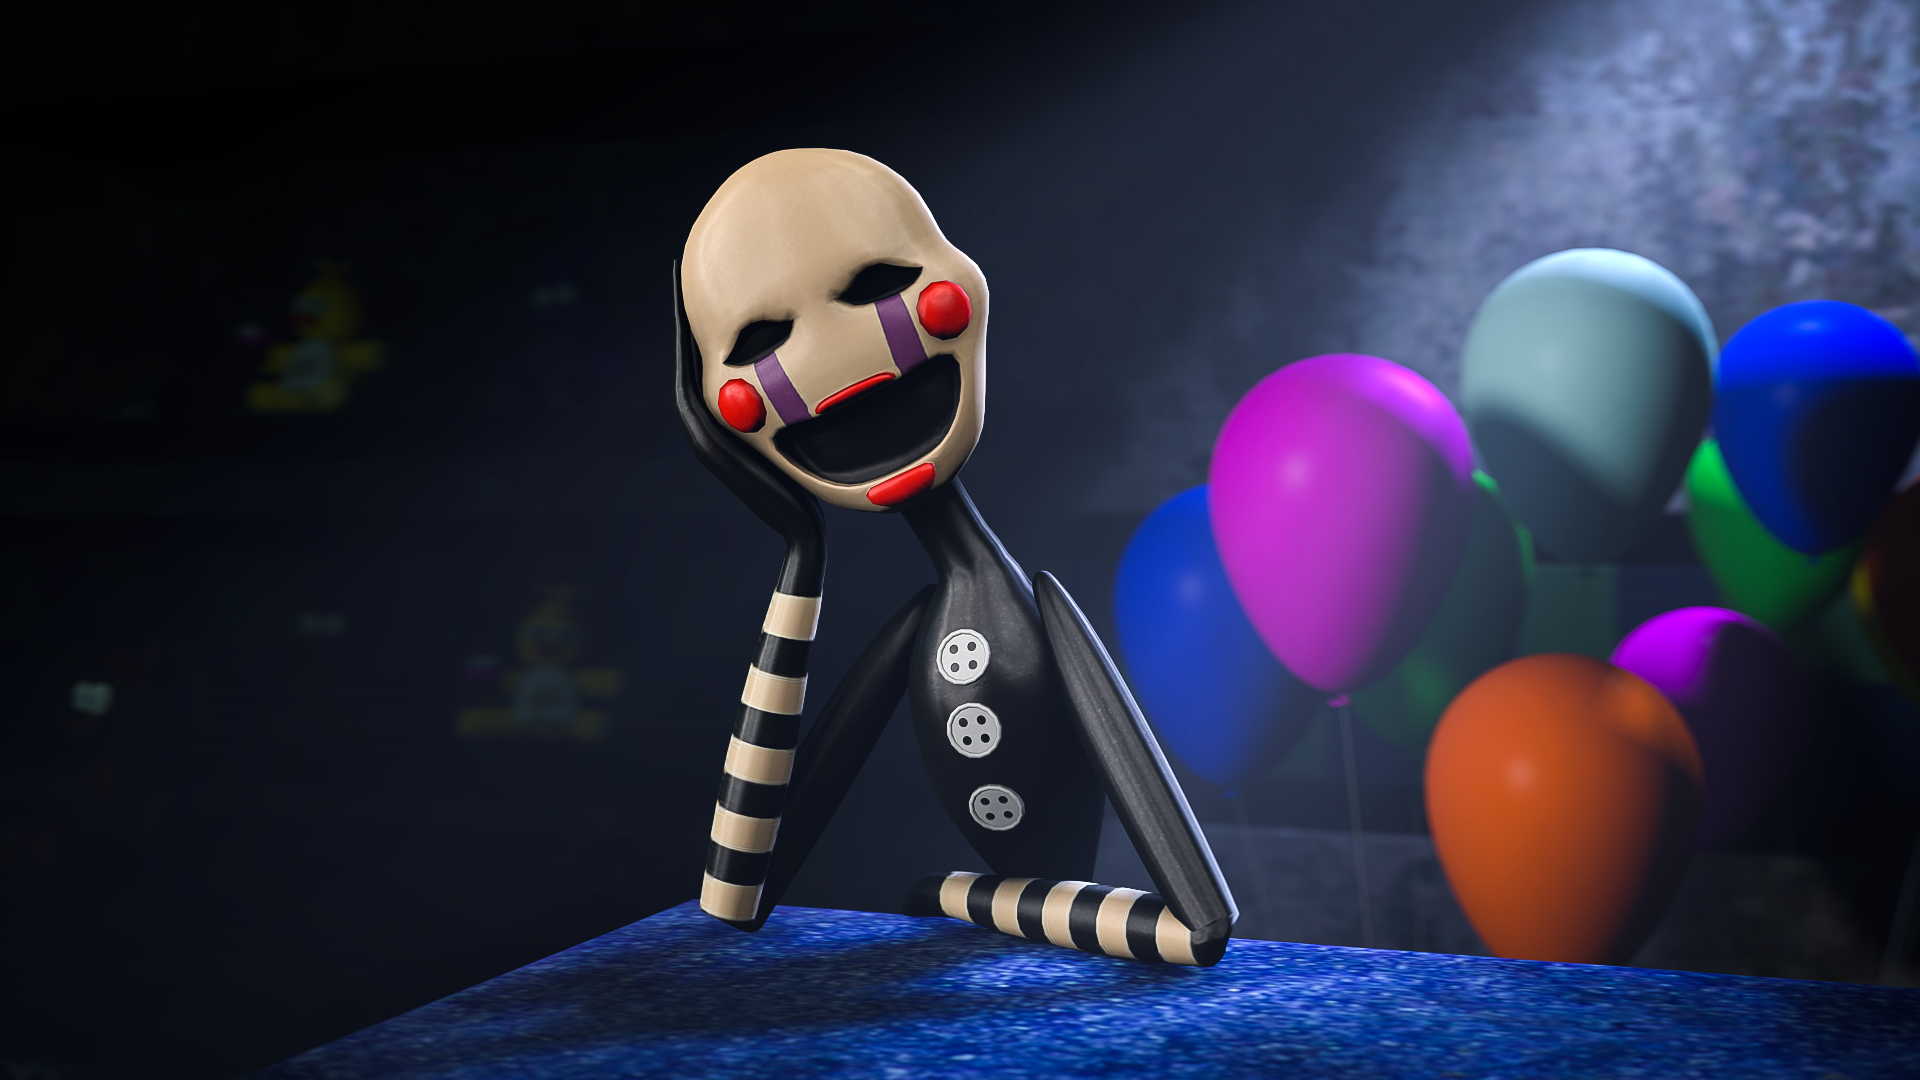 nightmare puppet wallpapers wallpaper cave on nightmare puppet wallpapers